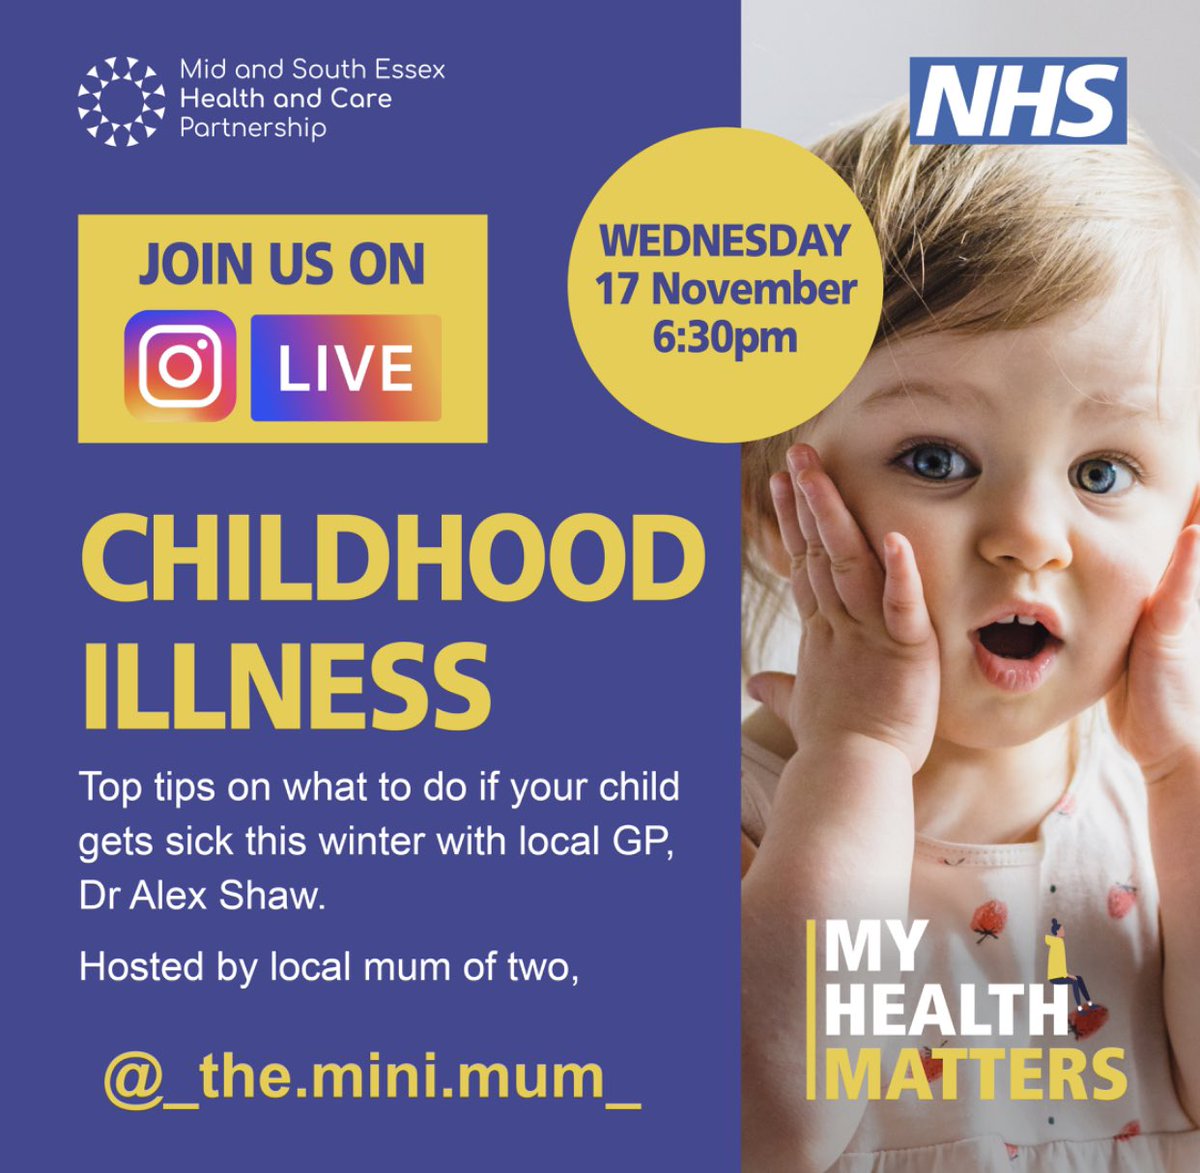 Next week is #SelfCareWeek. Join local mum of two Jenna Chapman and GP Dr Alex Shaw for a special Instagram Live on winter childhood illness. 🗓 17 Nov ⏰ 6:30pm to 7:00pm 📱 Instagram - follow ‘msessex_hcp’ and ‘_the.mini.mum’